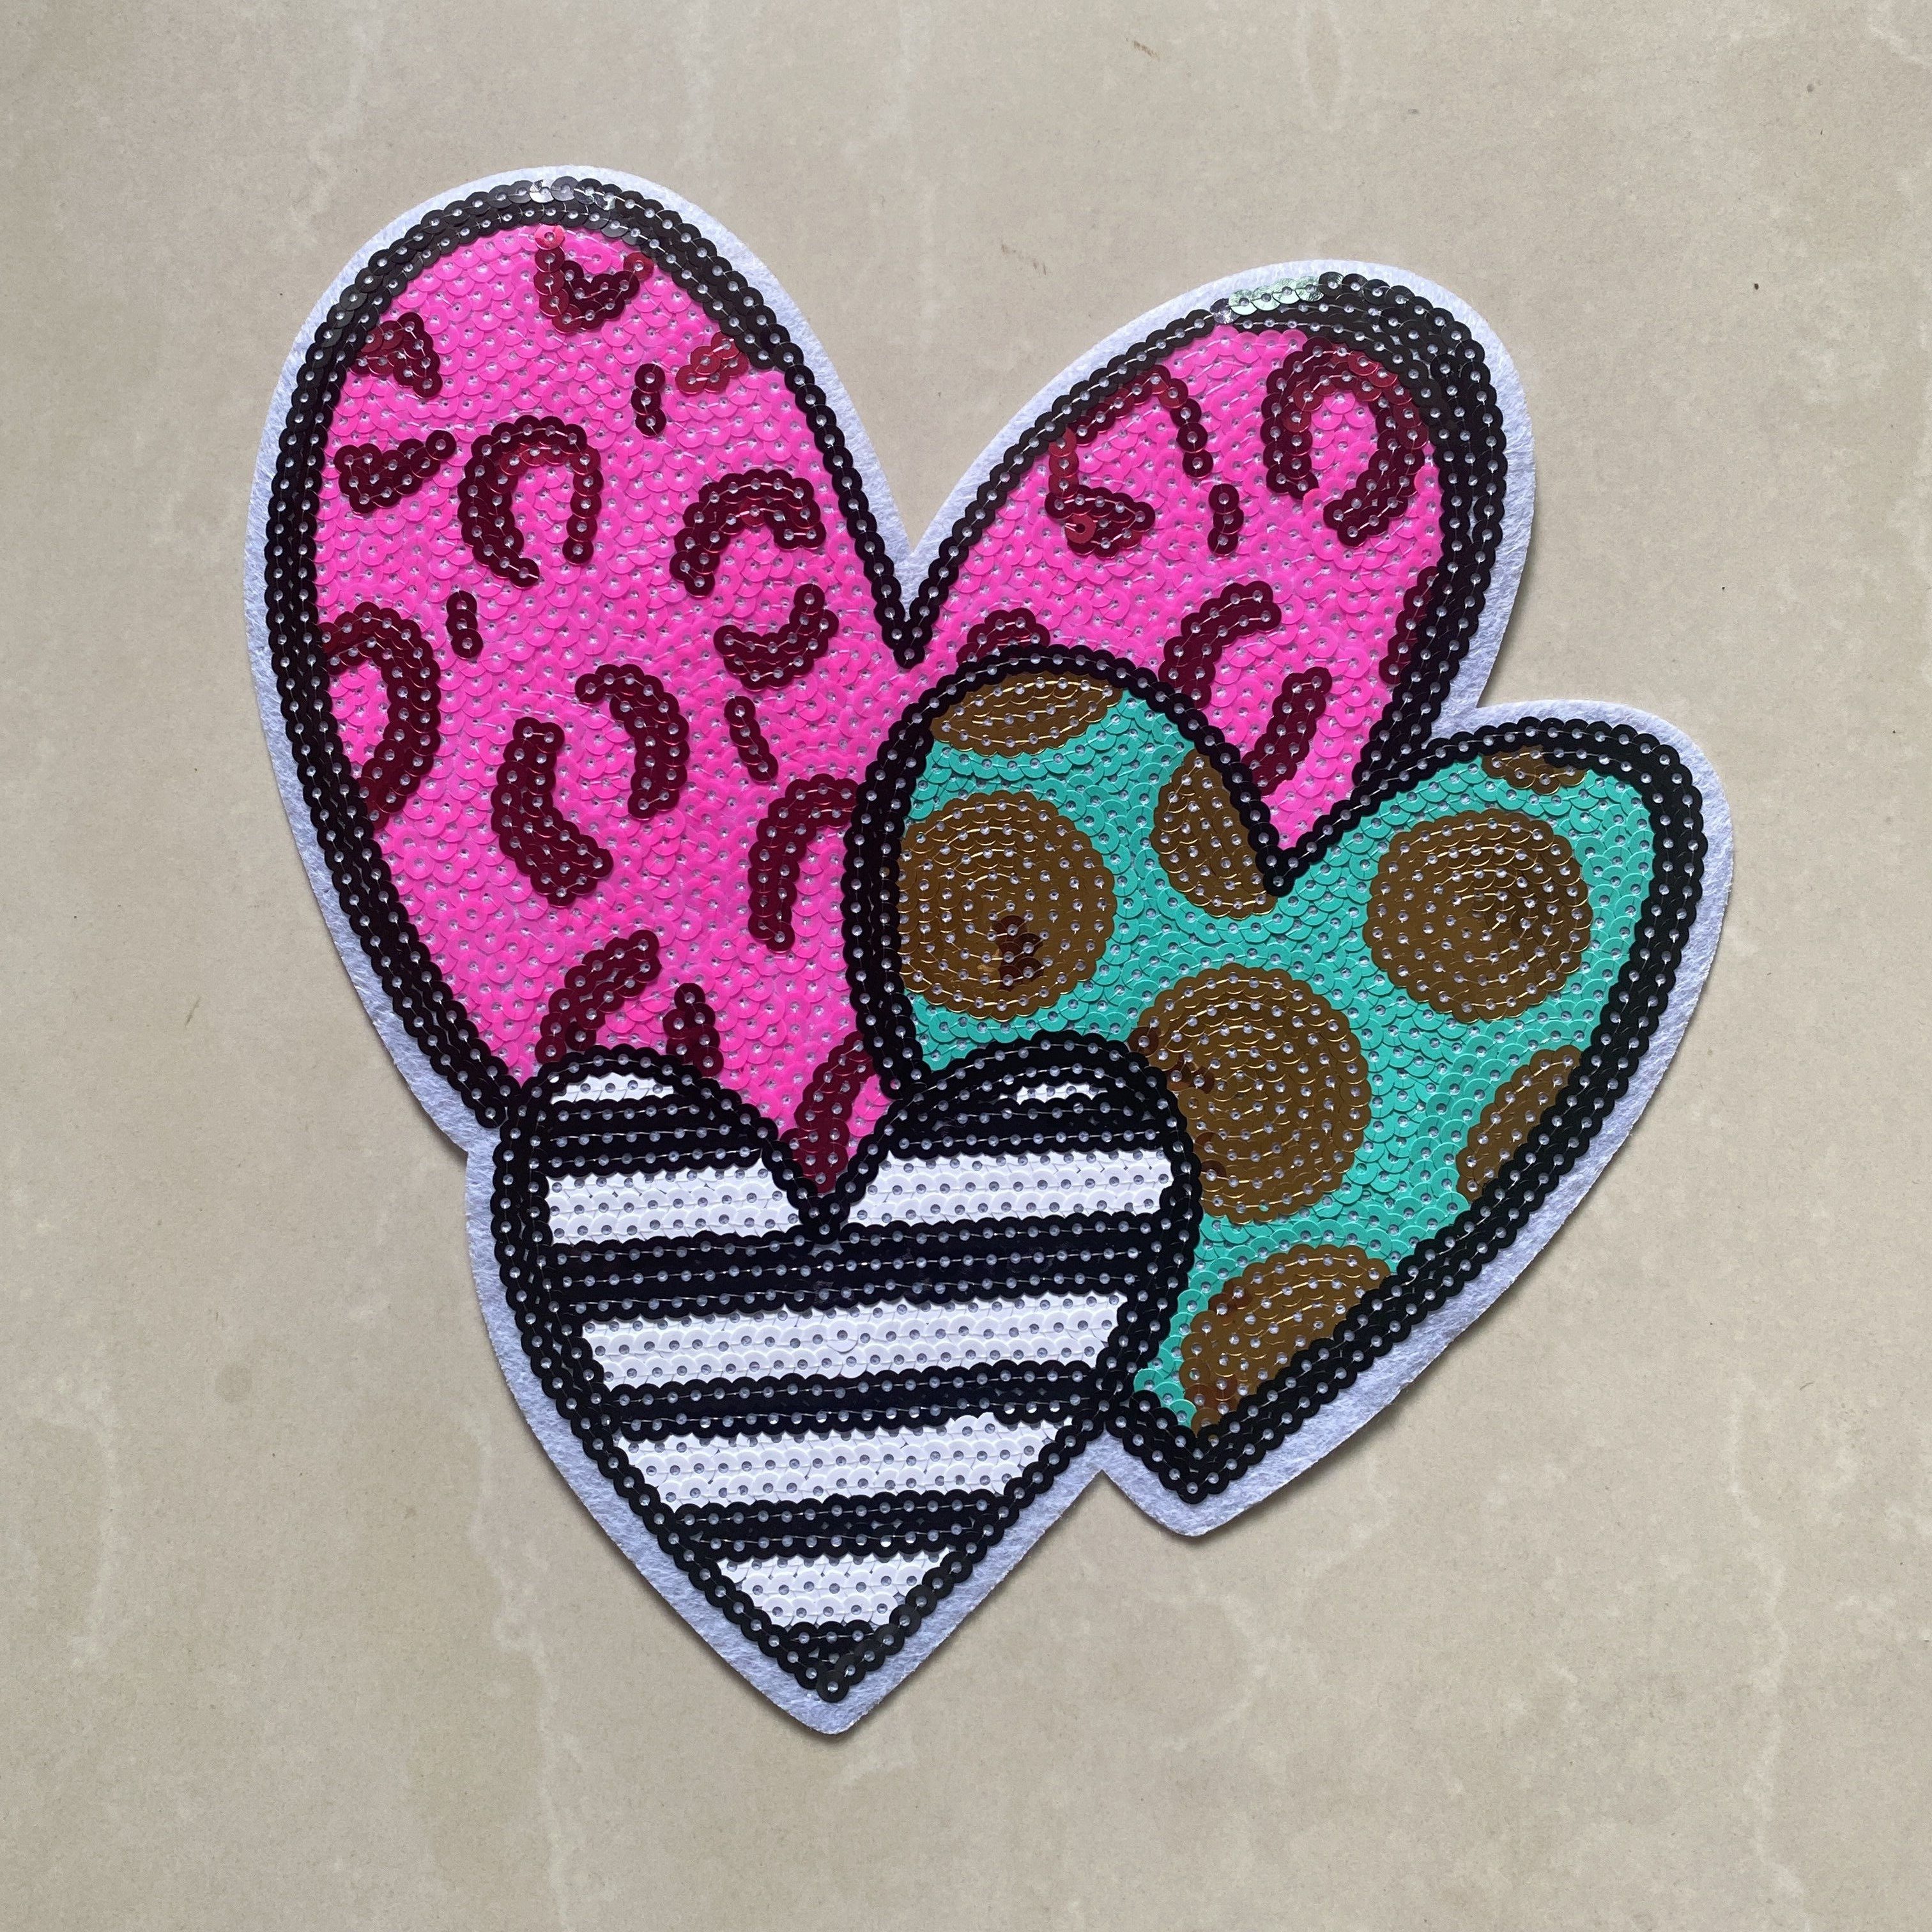 Embroidered Heart with Eyes Patch | Cute Heart Patches | PLAY Heart Patch |  Iron on Heart Patch Applique | T Shirt Patch Applique | 1.50